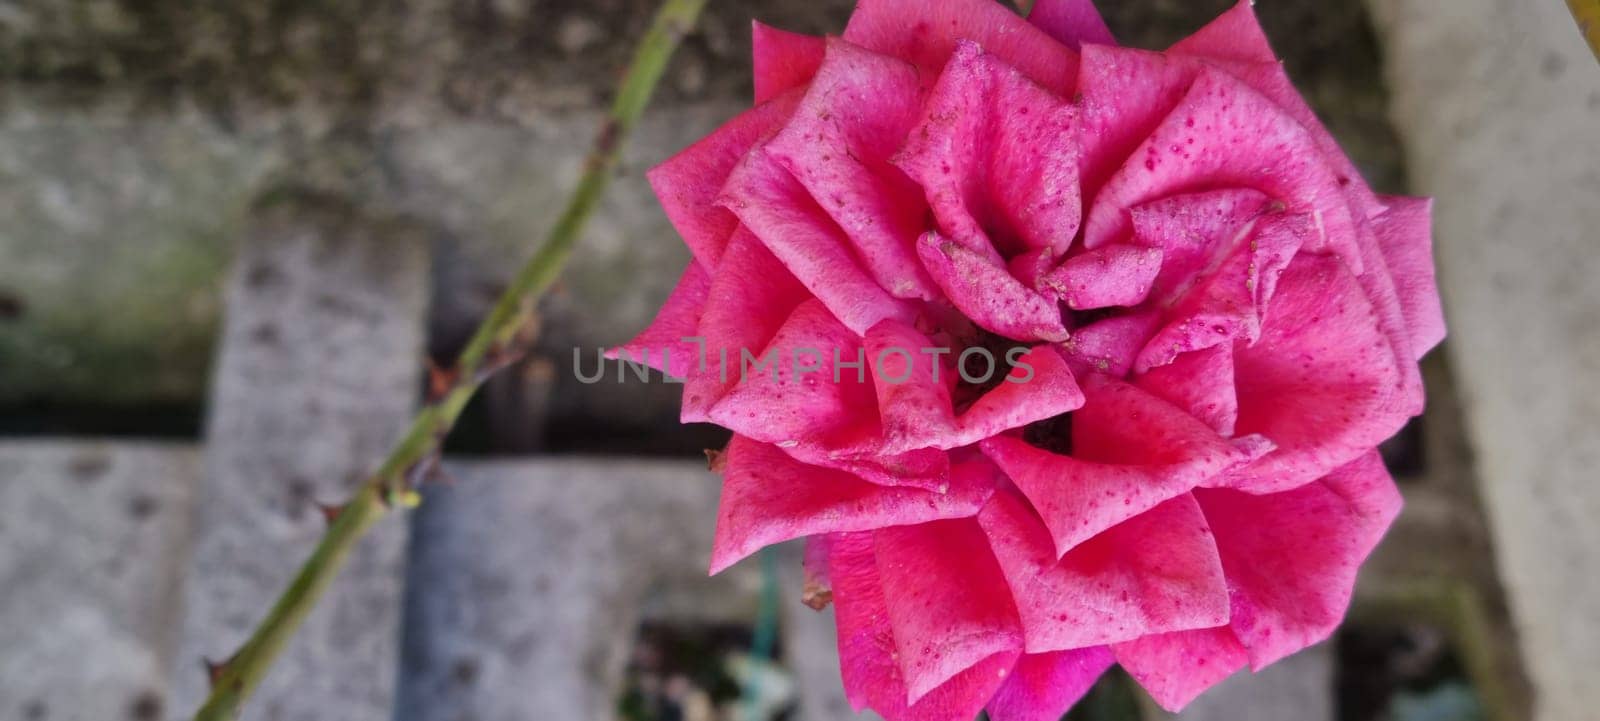 Vibrant pink rose in bloom by FlightVideo